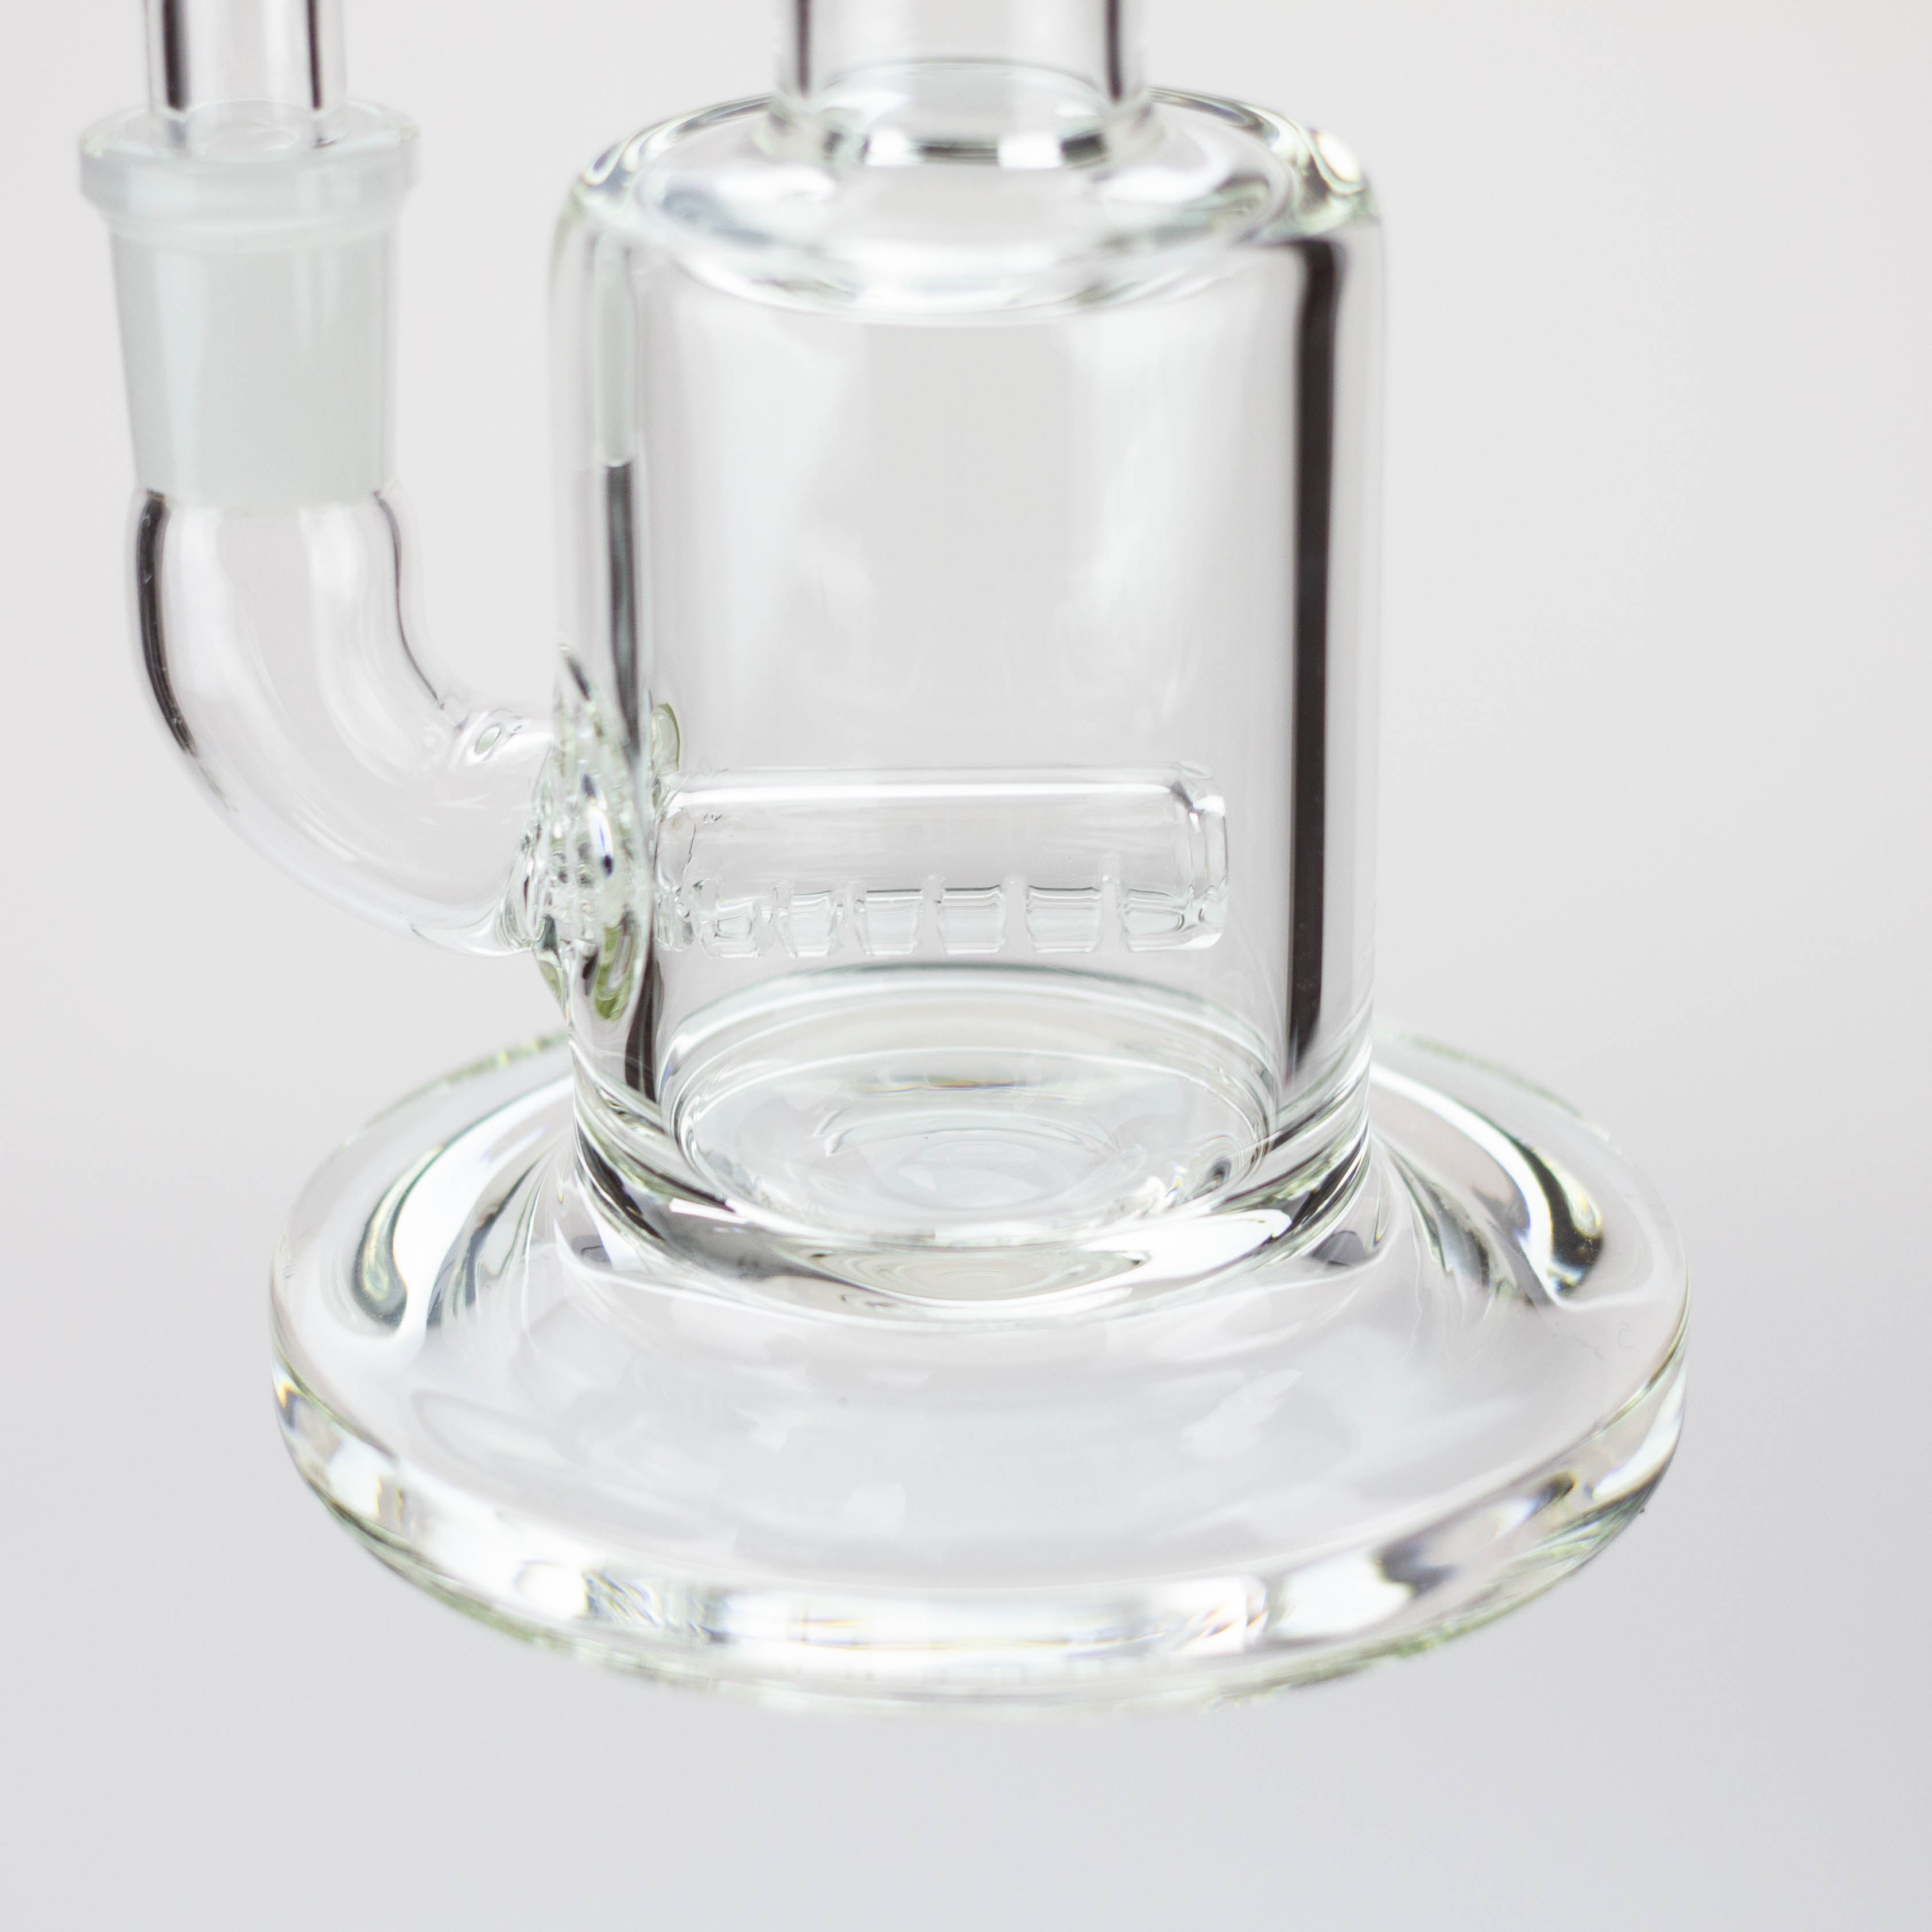 NG-8 inch Inline Bubbler_10